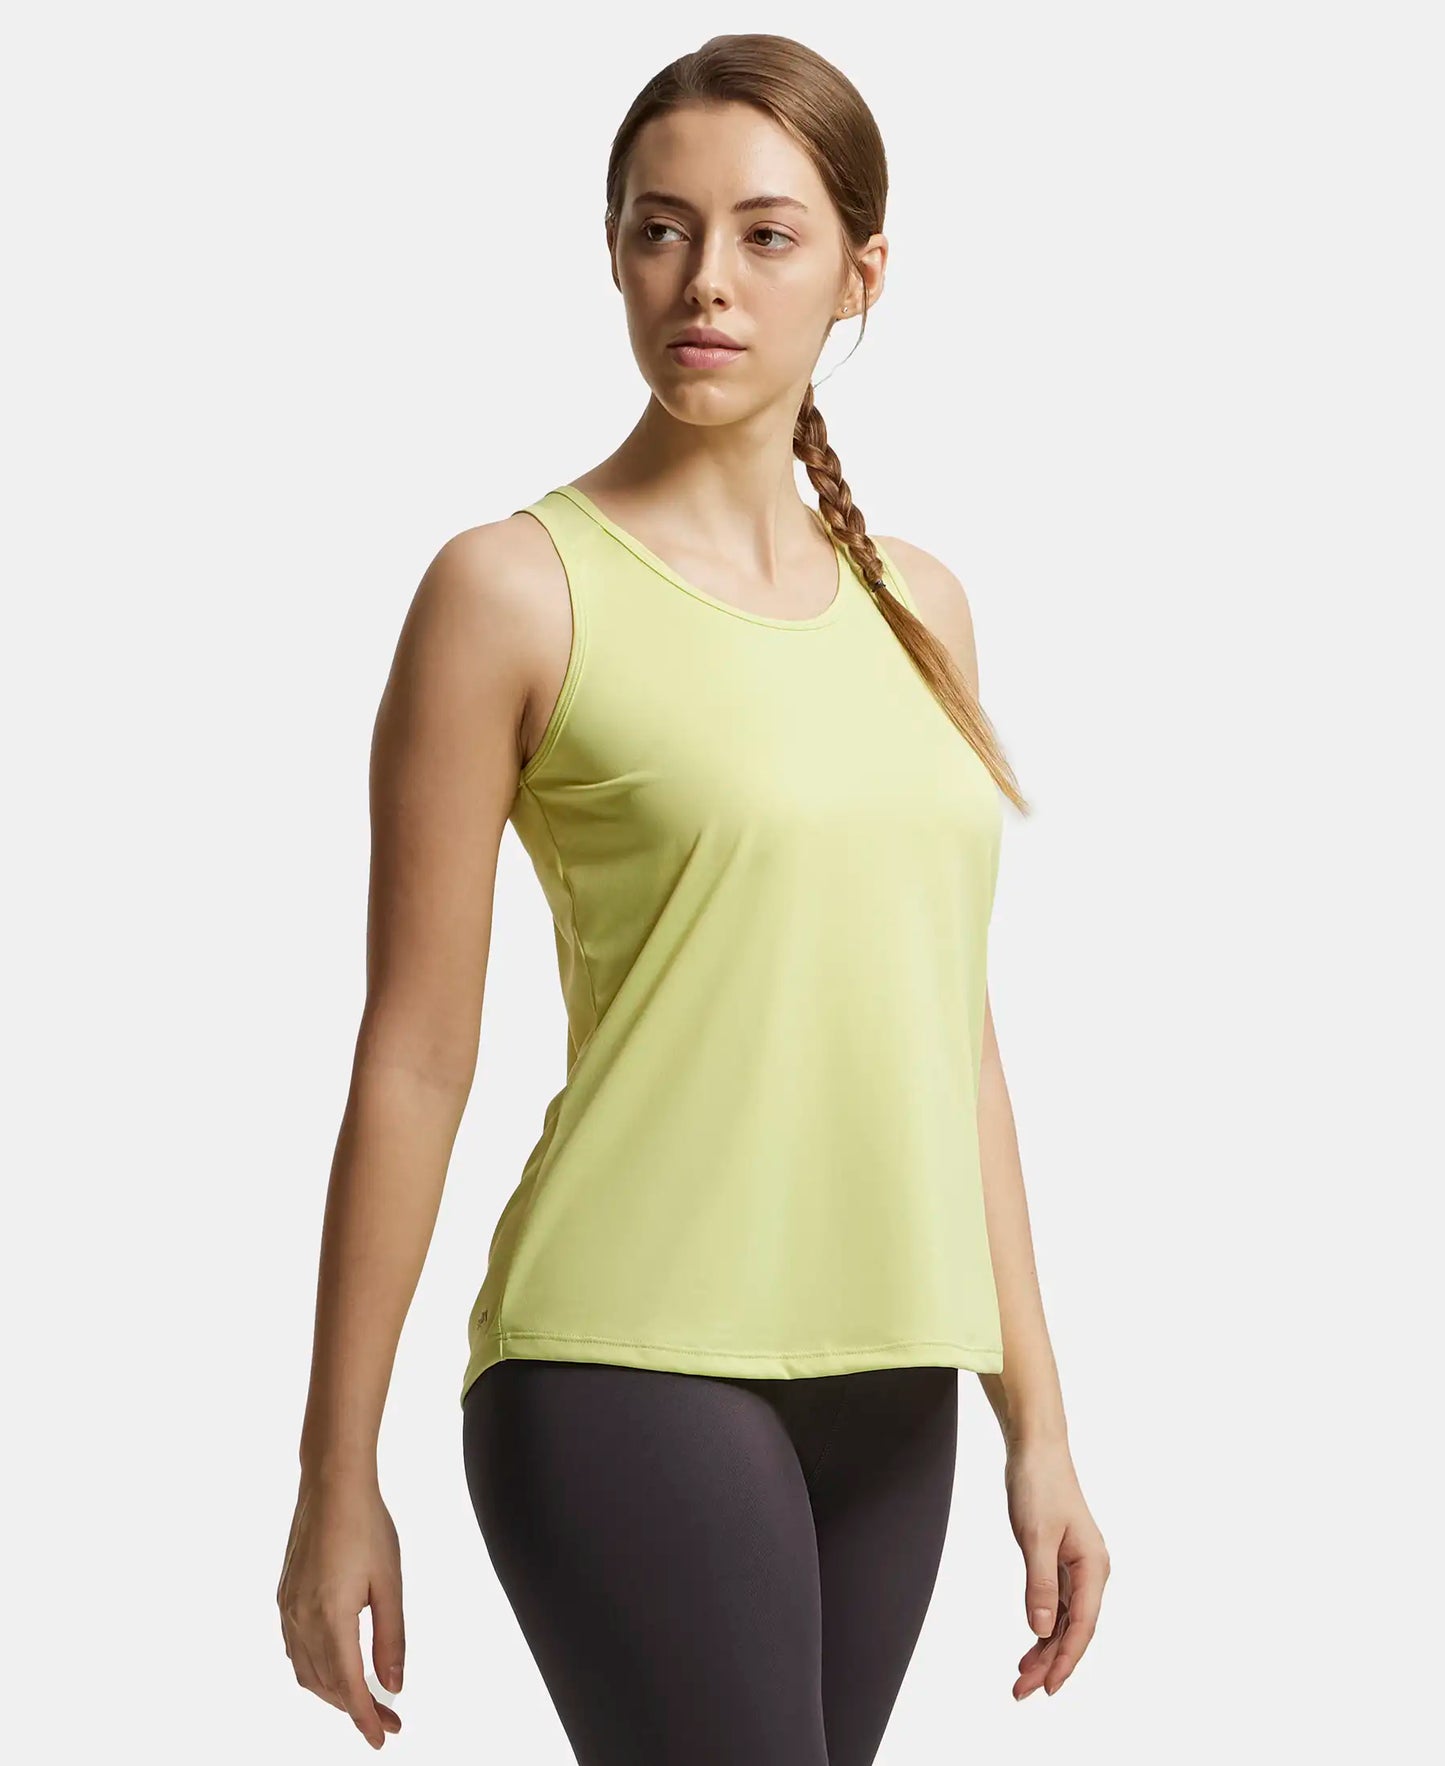 Microfiber Fabric Graphic Printed Tank Top With Breathable Mesh - Daiquiri Green-2